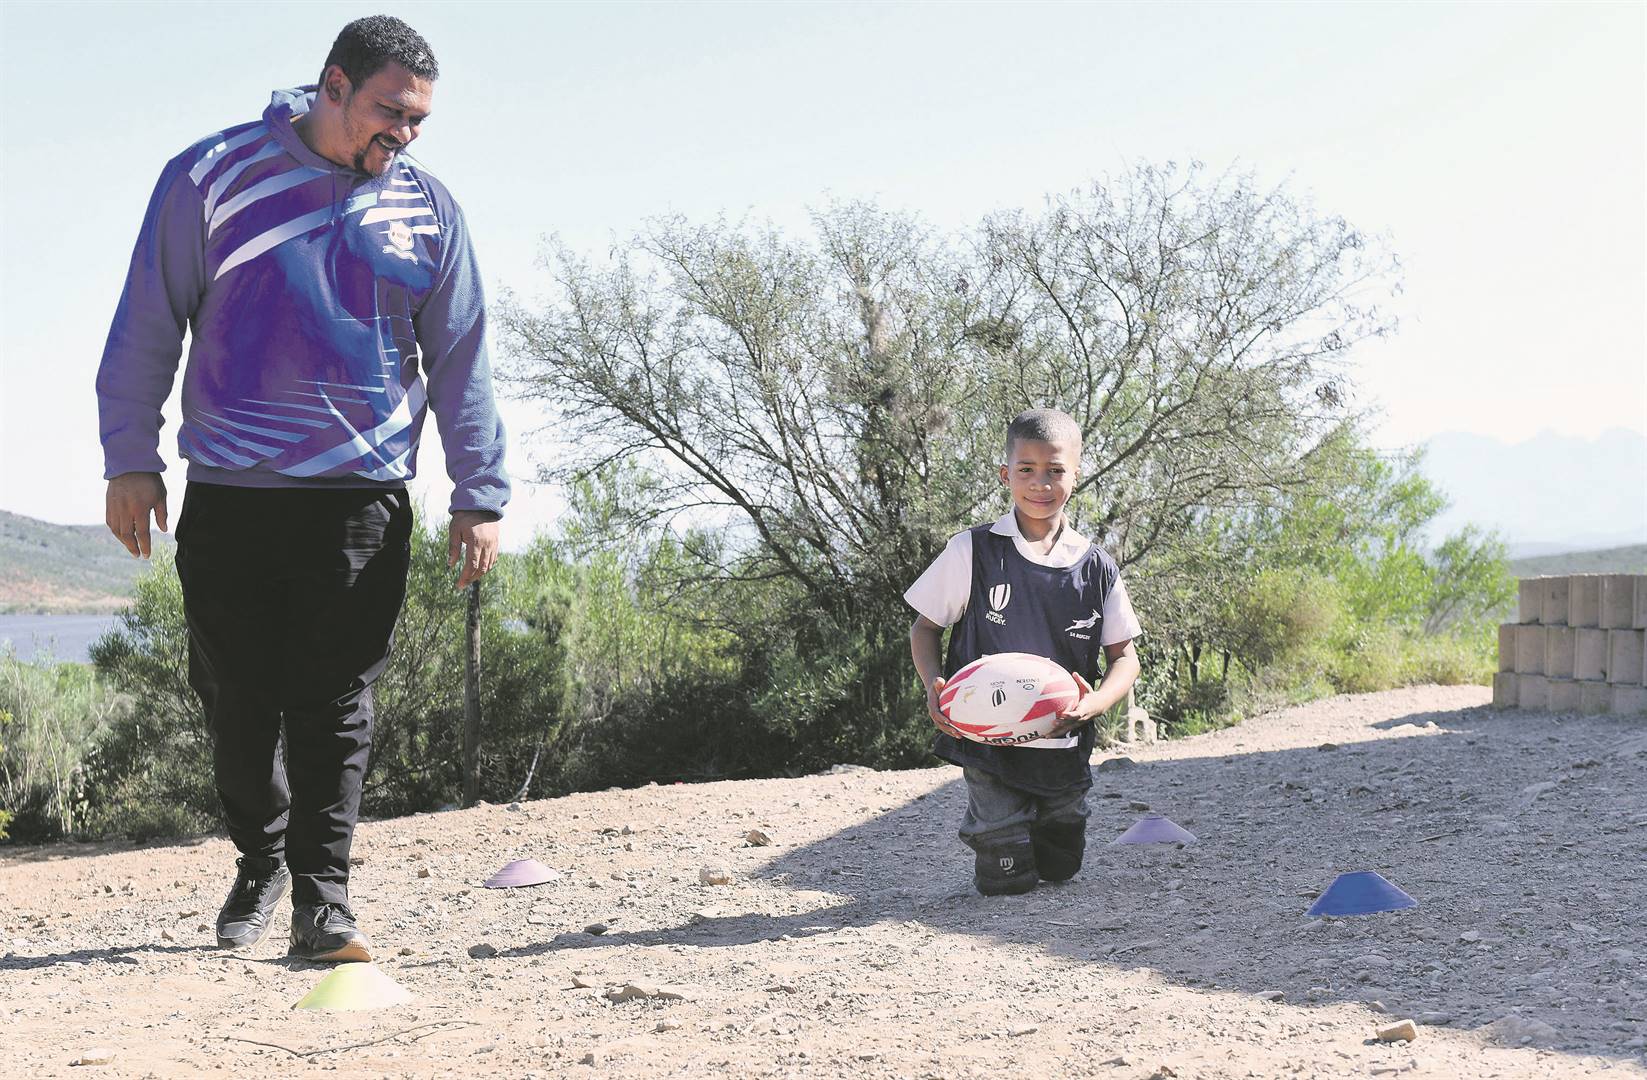 Grayton Rhode, from Stockwell NGK Primary School outside Ashton, lost his legs when he was three. He is seen here with his coach Gaewinne Niemand.